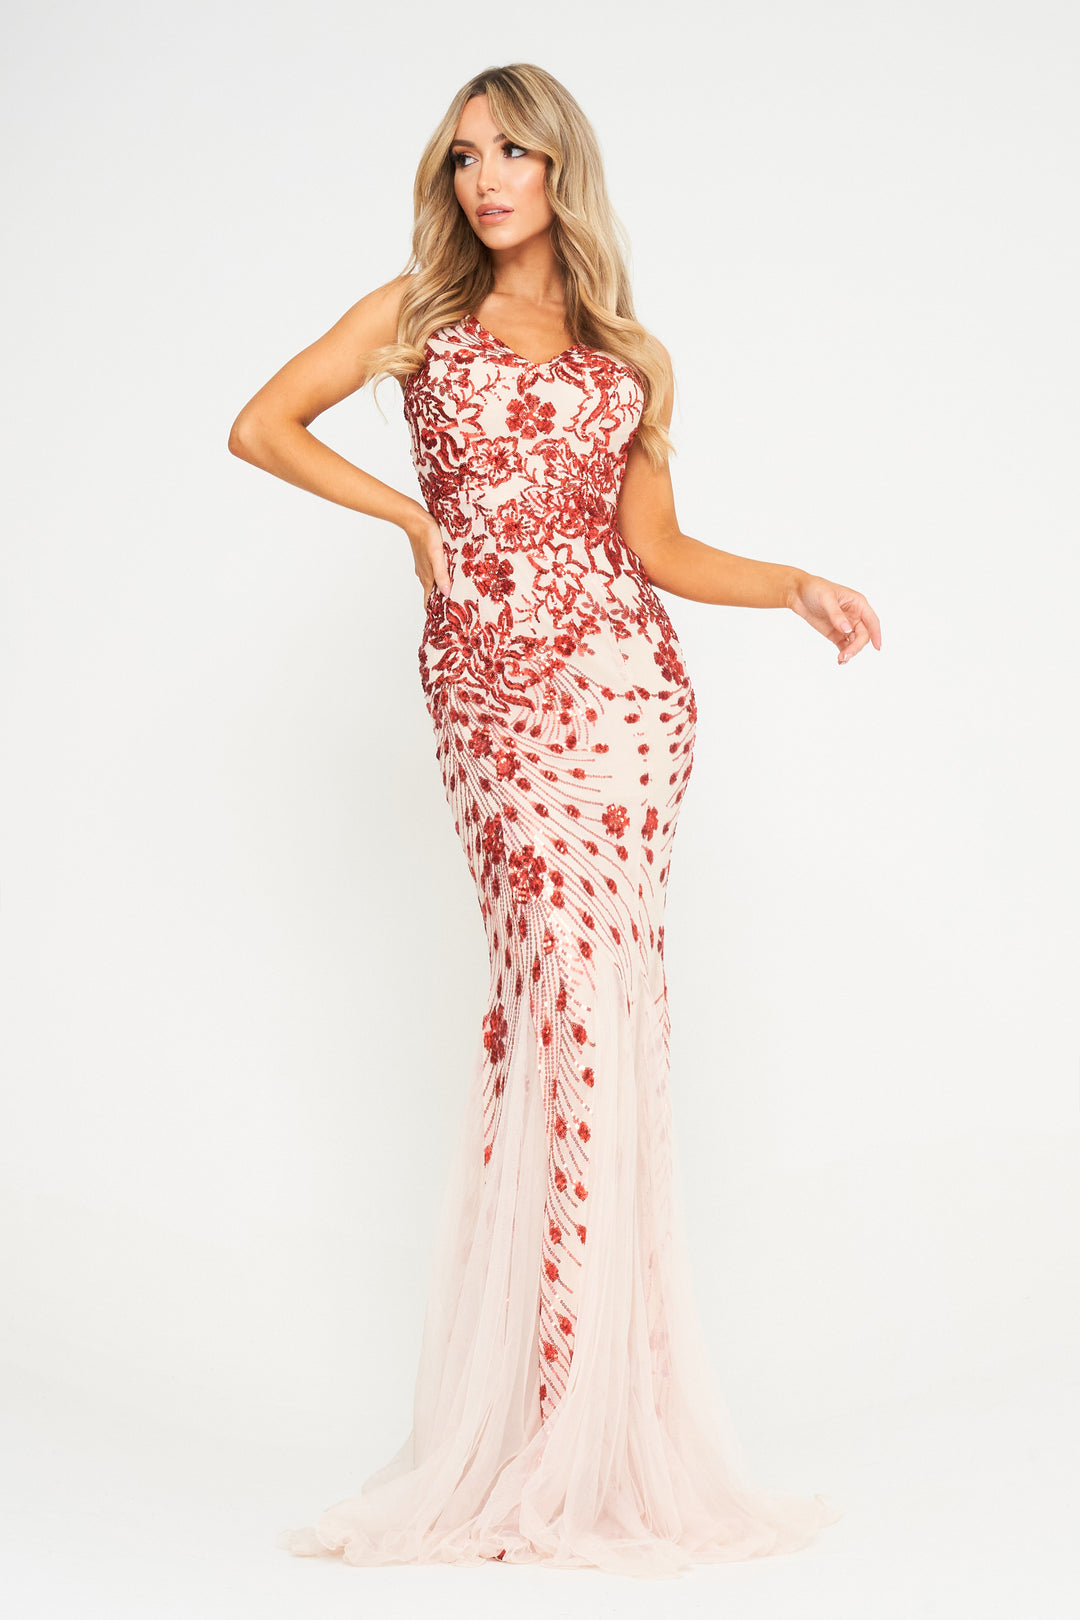 Red Sequin Champagne Mesh Insert Maxi Dress - Front View 2